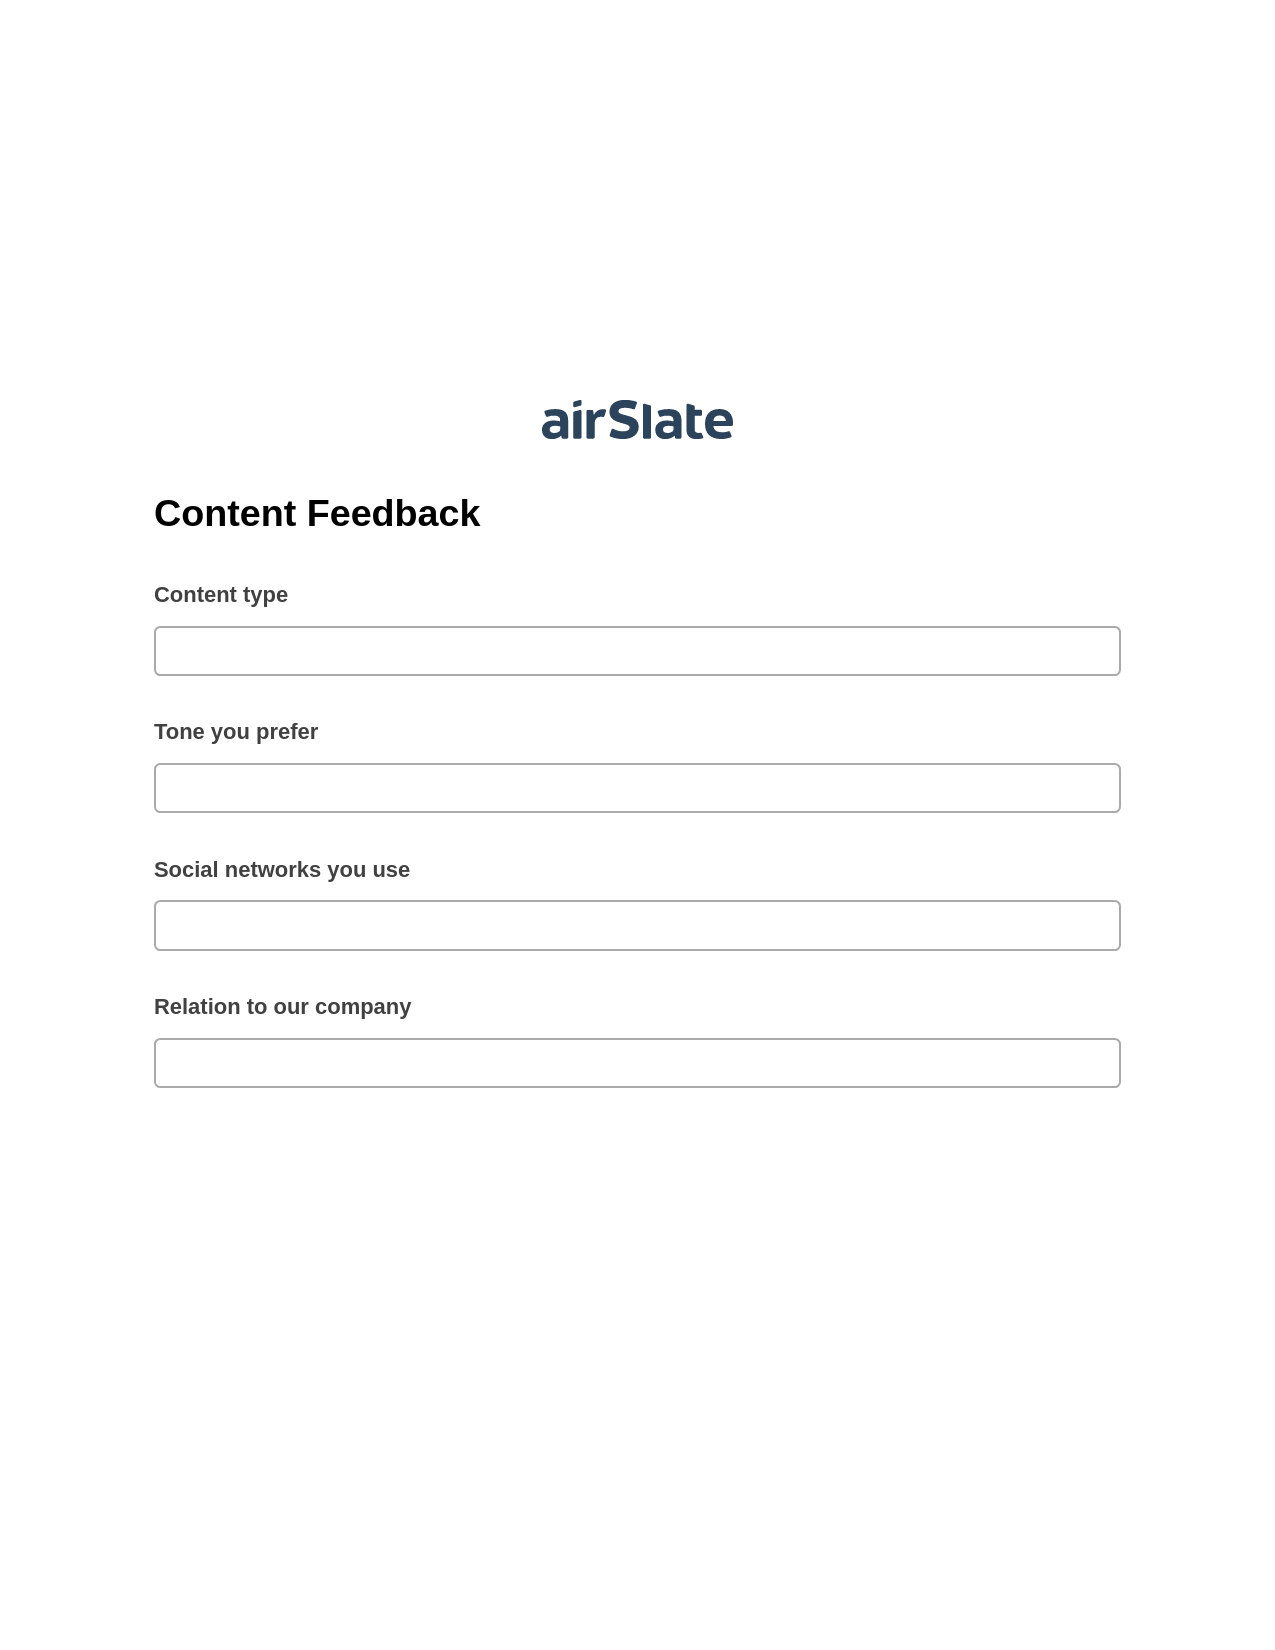 Content Feedback Pre-fill Slate from MS Dynamics 365 Records Bot, Create NetSuite Records Bot, Google Drive Bot